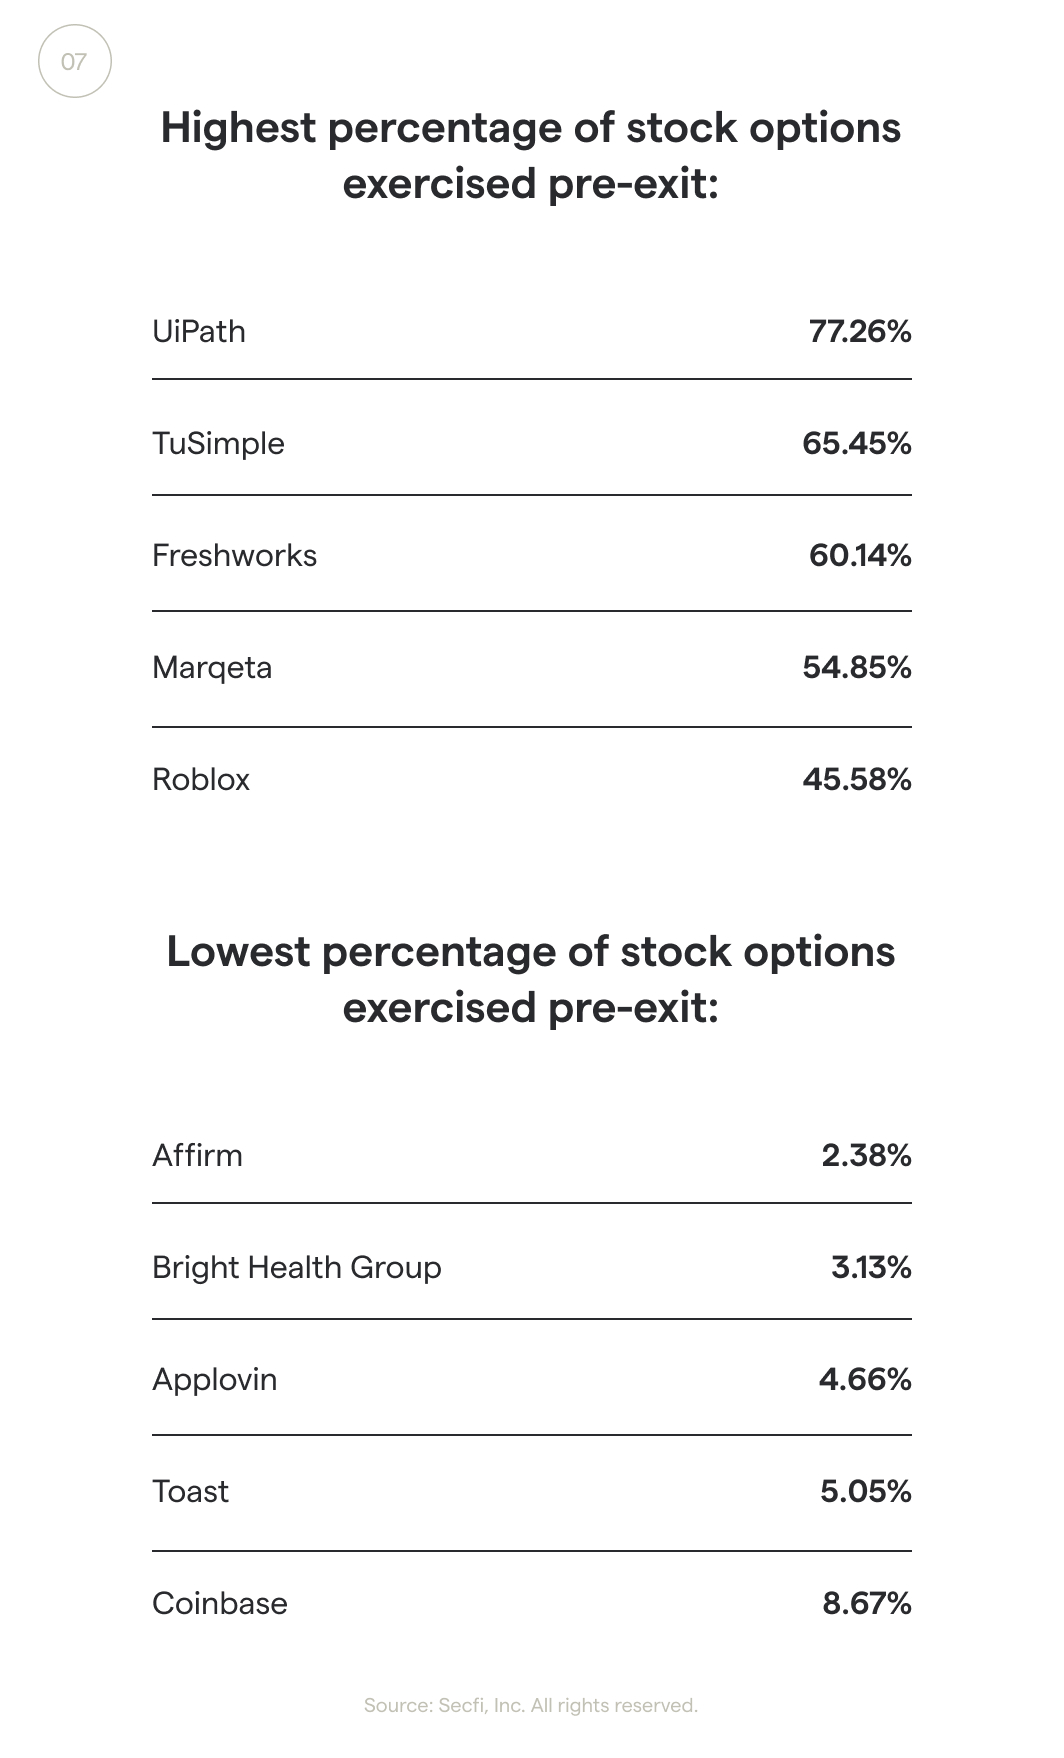 Pre-exit stock option exercise rates by company in 2021